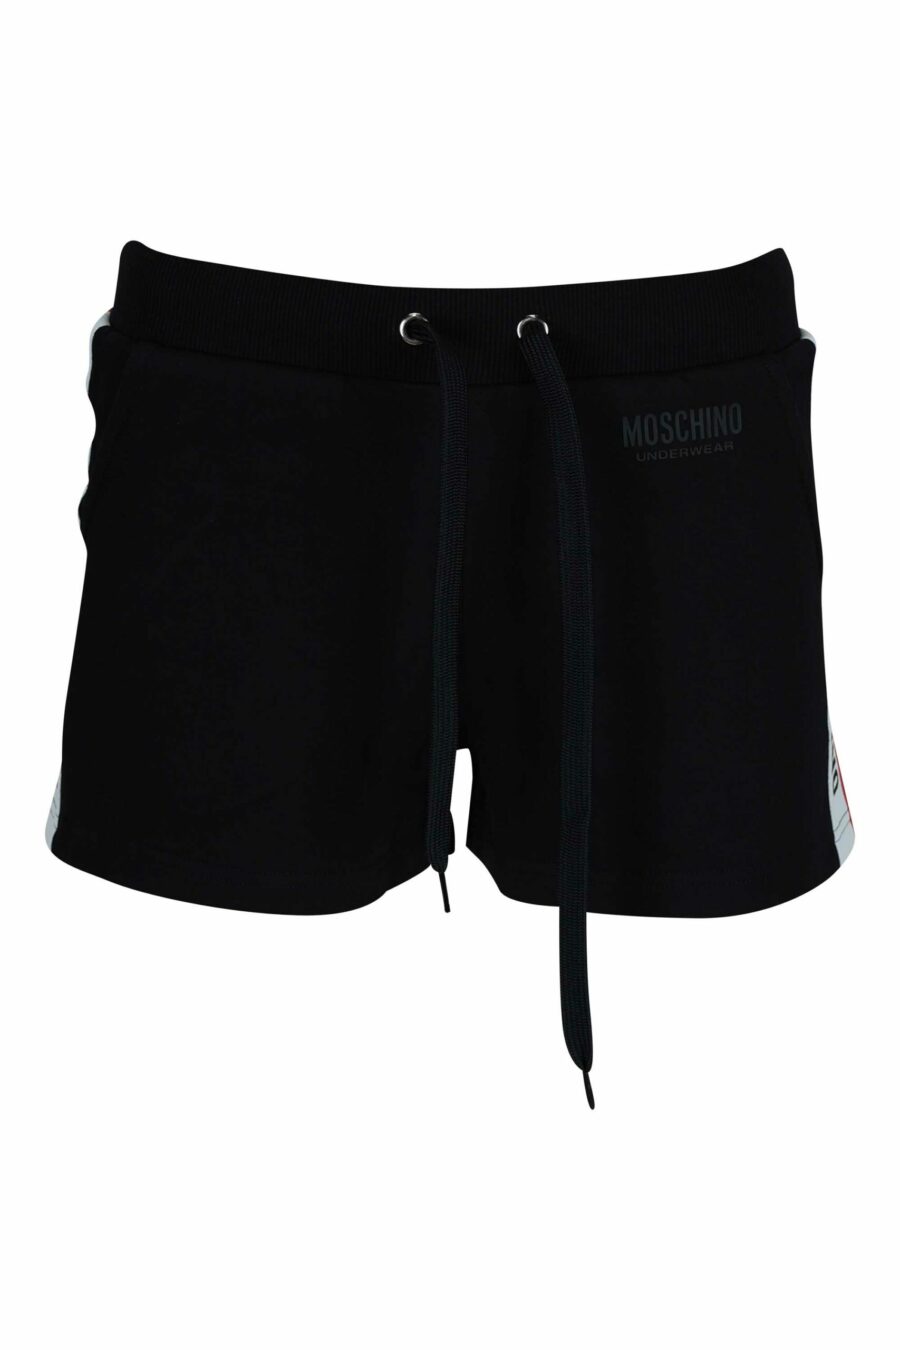 Black shorts with black ribbon logo with red side details - 667113353623 scaled